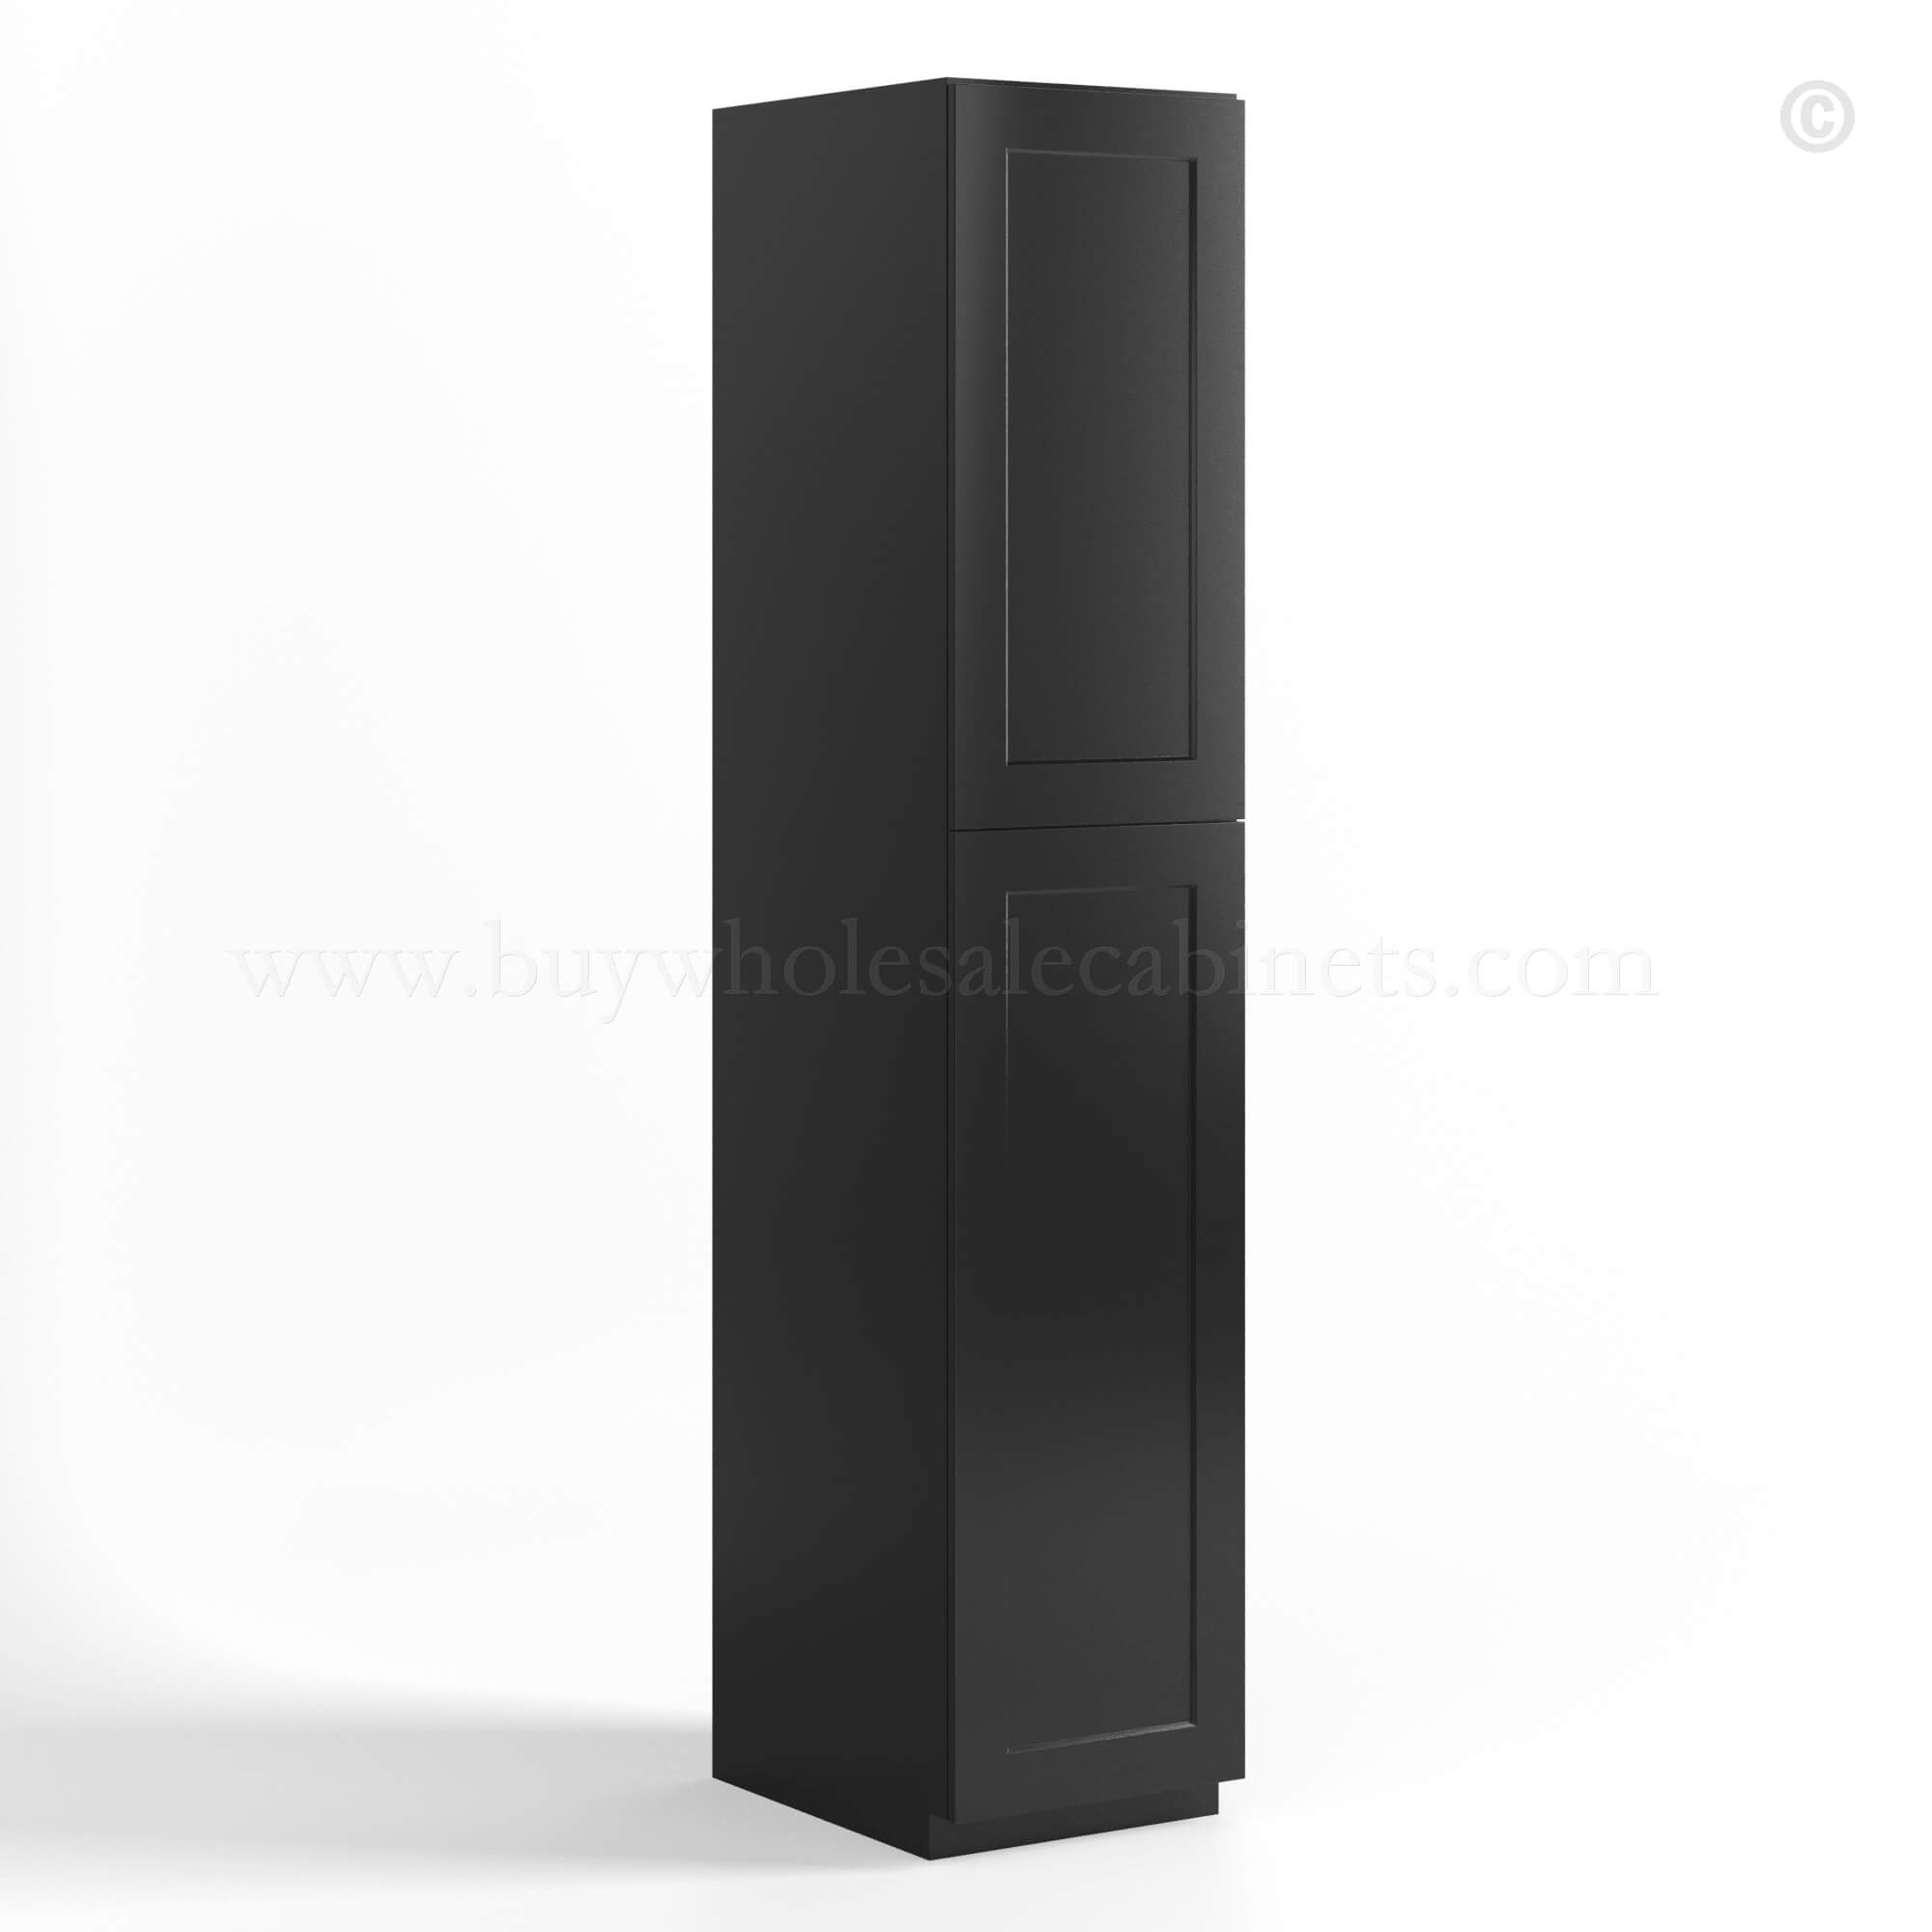 Black Shaker Tall Pantry Cabinet 2 Doors, rta cabinets, wholesale cabinets